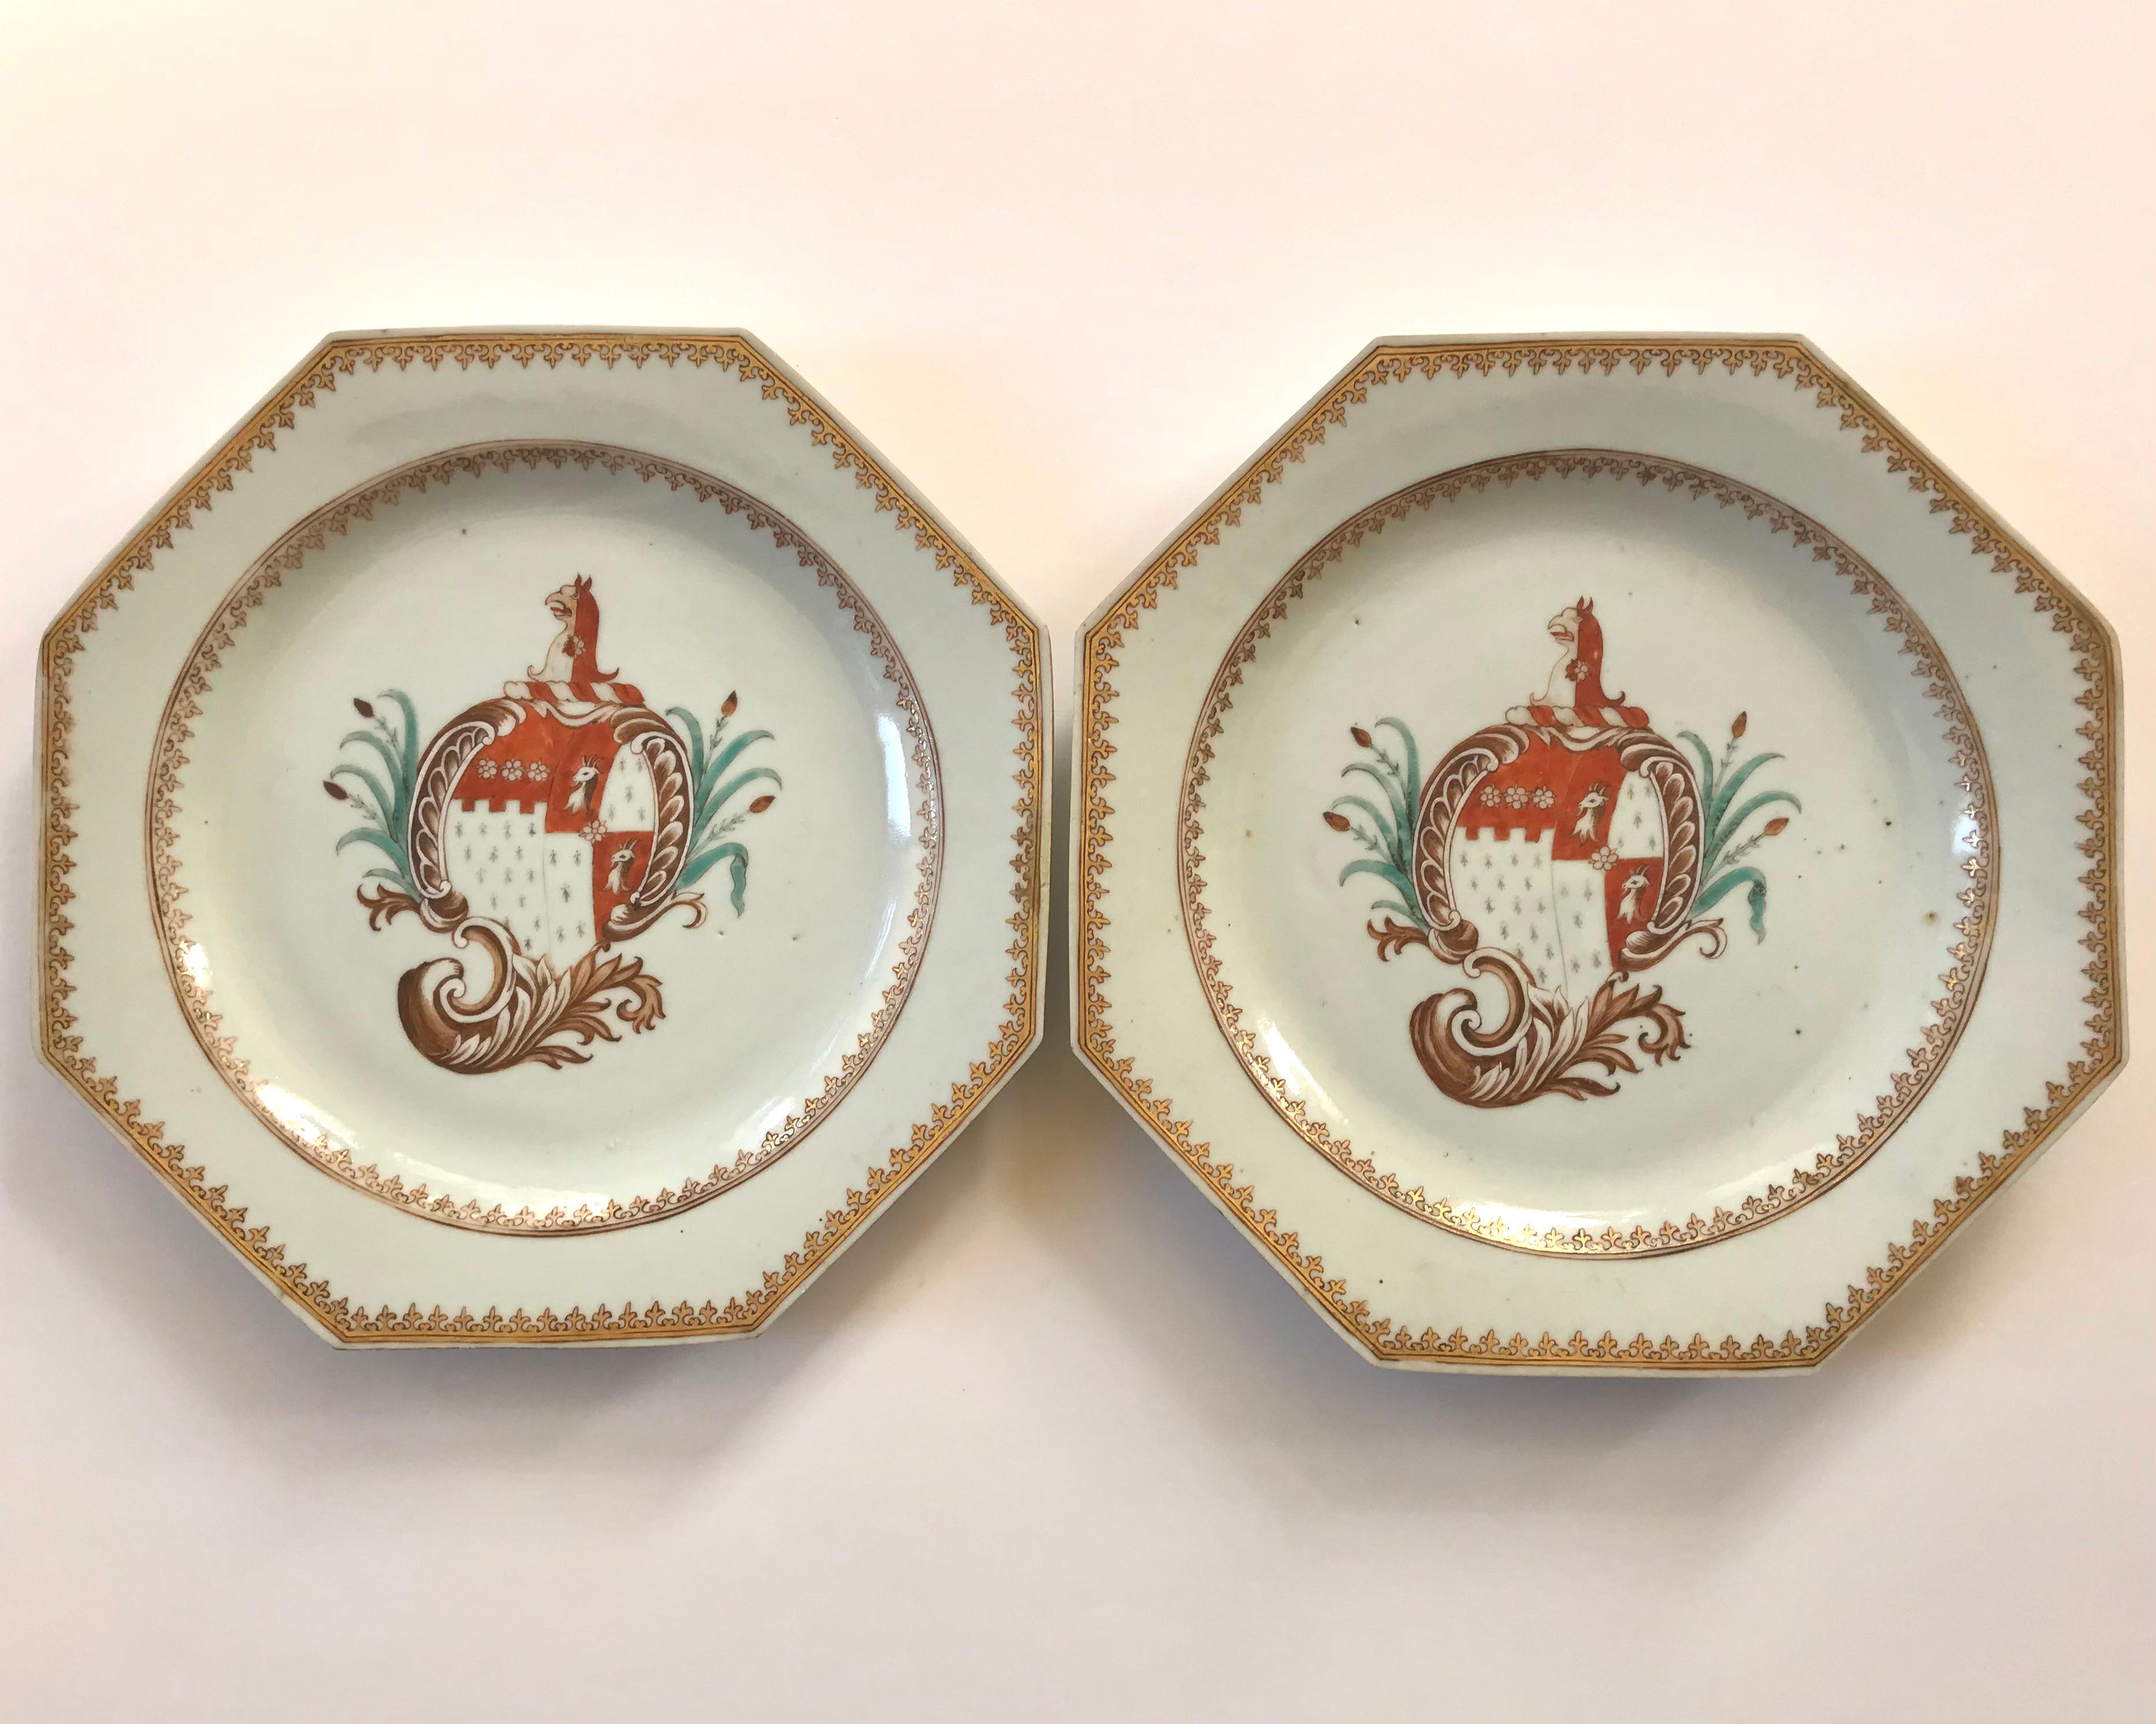 A pair of Chinese export armorial octagonal plates, 
Qianlong period, Ca. 1765
18th century
Diameter: 9 Inches

Condition: very good with glazing slips and very minor flea bites to edged. Please look at photos.

AVANTIQUES is dedicated to providing